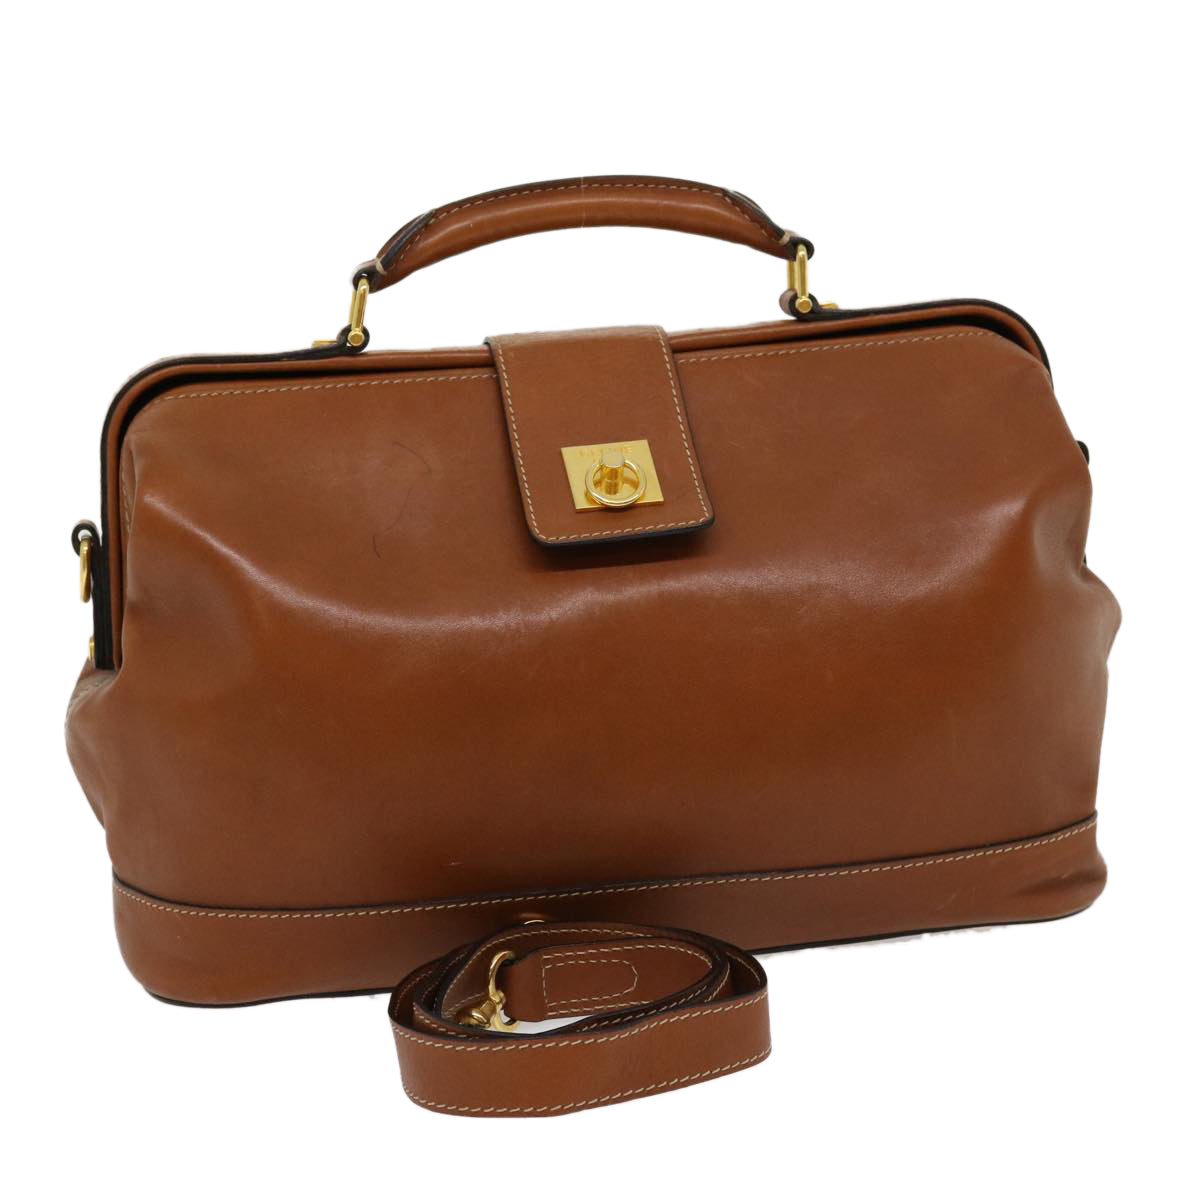 CELINE Hand Bag Leather 2way Brown Auth am2746g